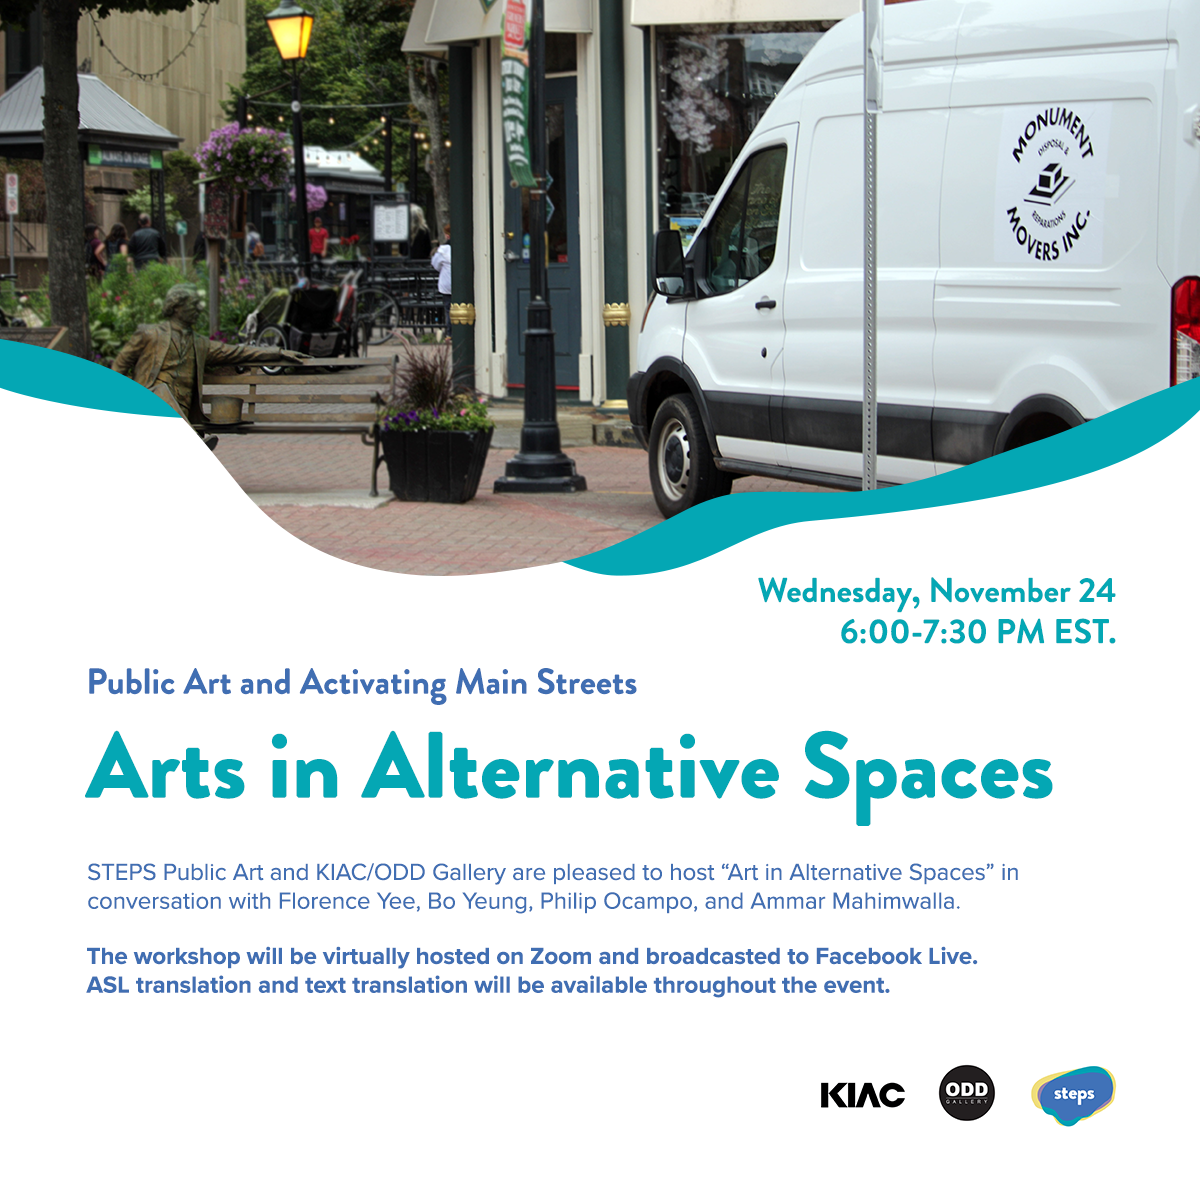 A square graphic with a photograph in the top half of the image of a white van parked in a city public space with storefronts, lamp posts, outdoor benches and planters. The van has a sign that says “Monument Movers Inc”. In the bottom half of the graphic is blue and teal texts that say “Public Art and Activating Main Streets, Arts in Alternative Spaces” with date and event information. Along the bottom are City of Toronto, TD Ready Commitment, KIAC, Odd Gallery and STEPS Public Art logos.